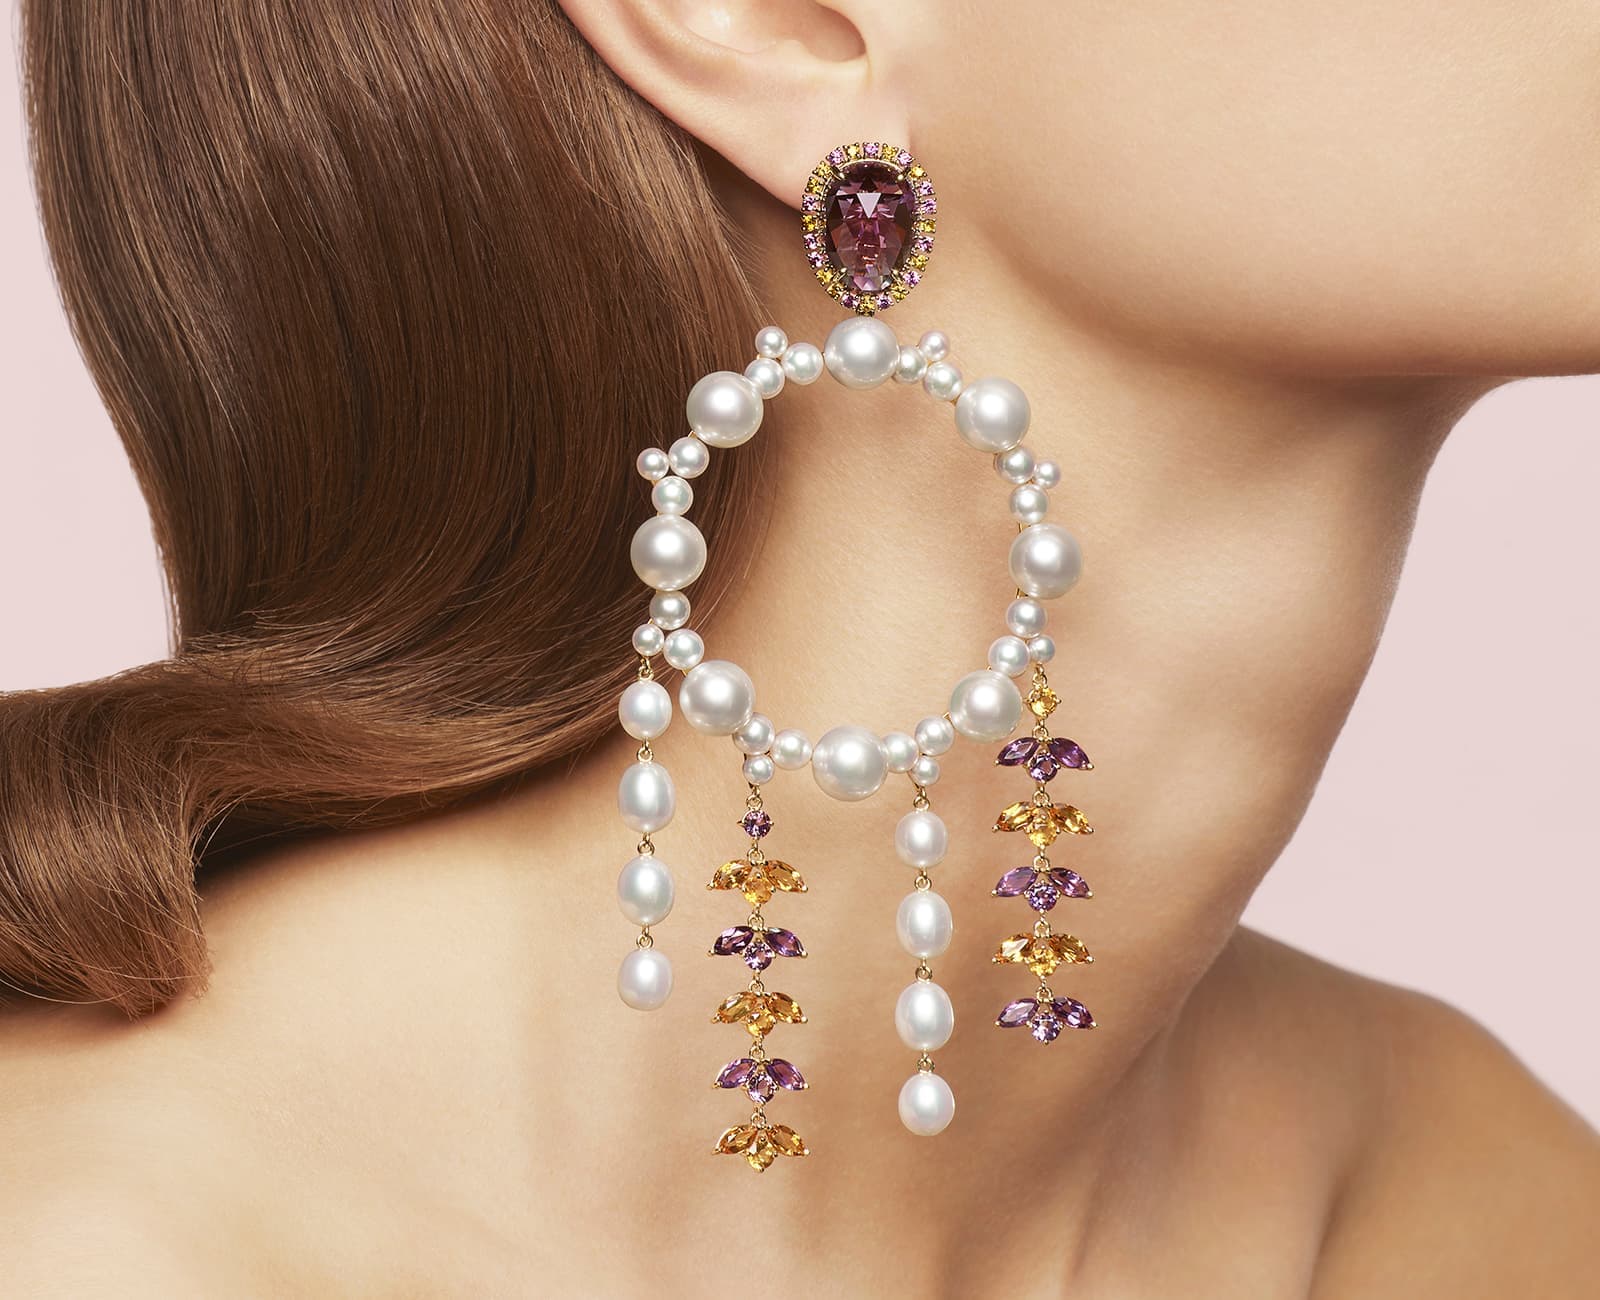 TASAKI Atelier Nightfall earrings with Akoya pearls, South Sea pearls and freshwater pearls with sapphire, amethyst and citrine in yellow gold 